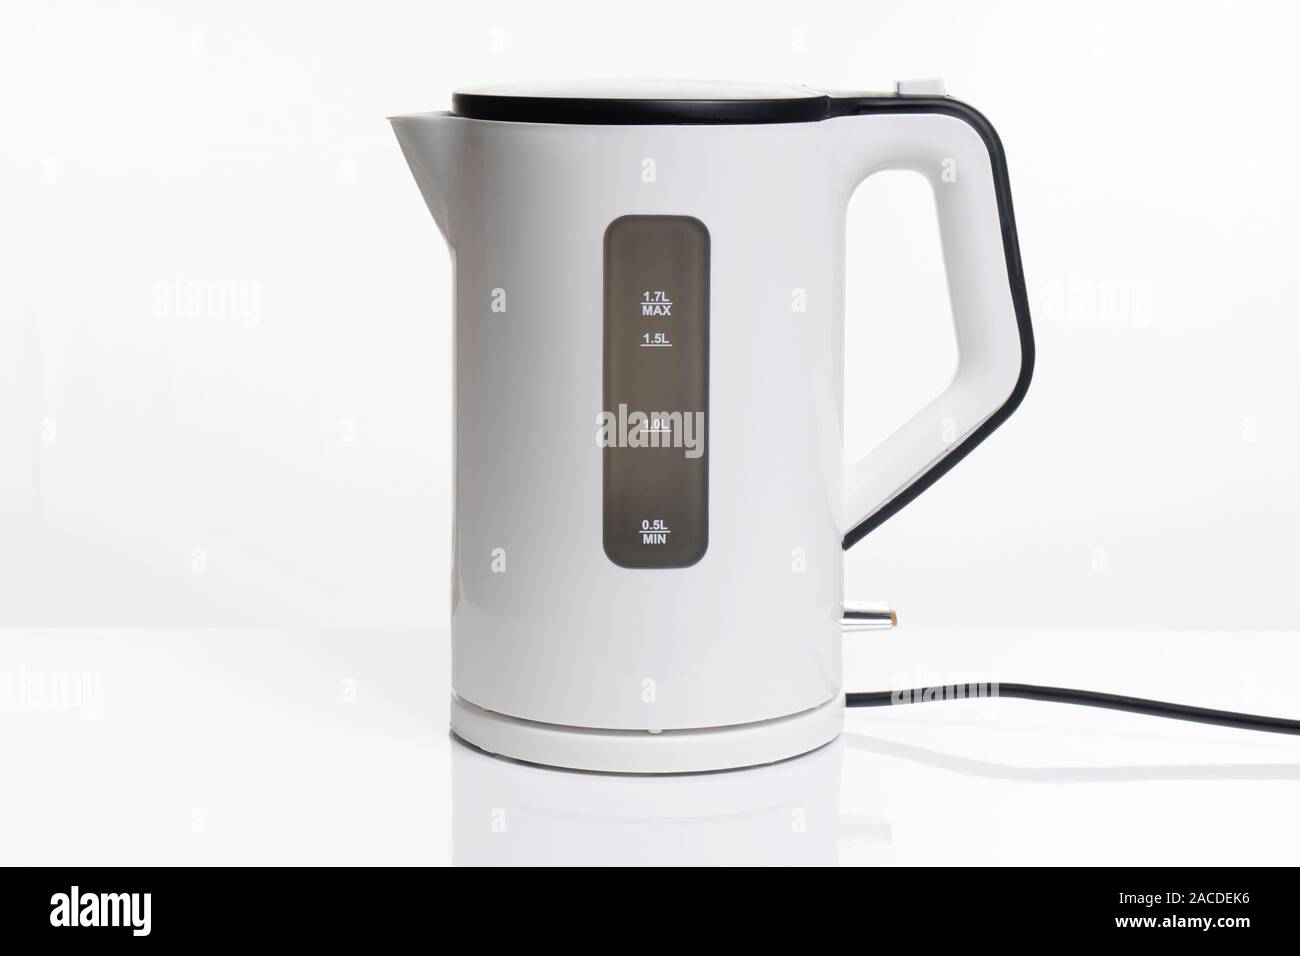 electric kettle or water boiler kitchen appliance Stock Photo